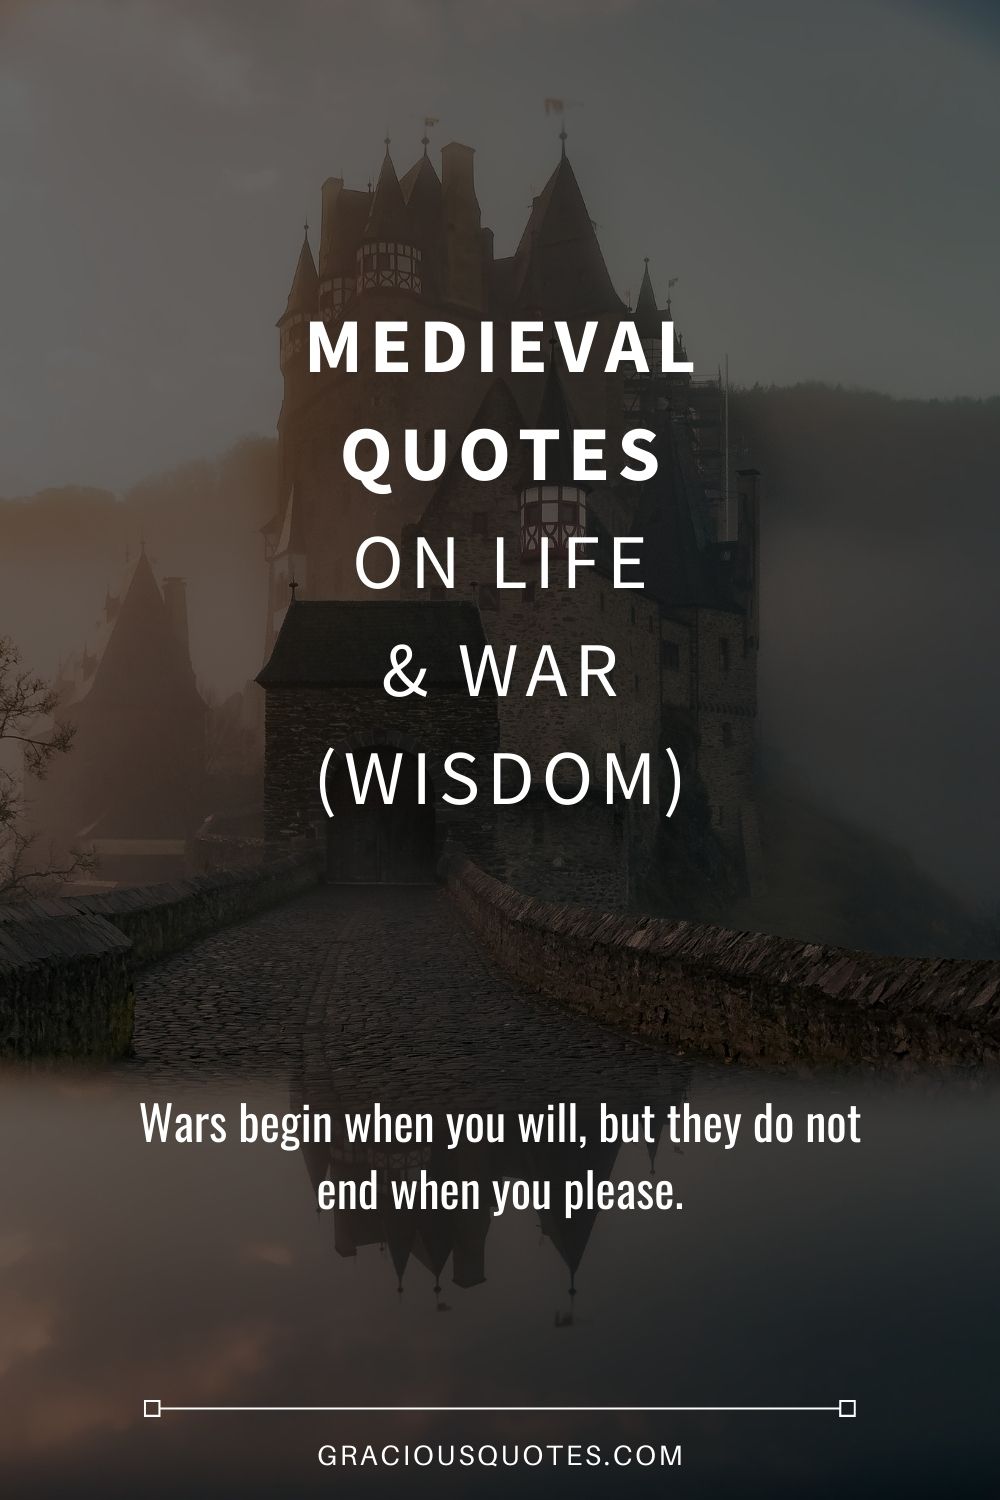 Medieval Quotes on Life & War (WISDOM) - Gracious Quotes